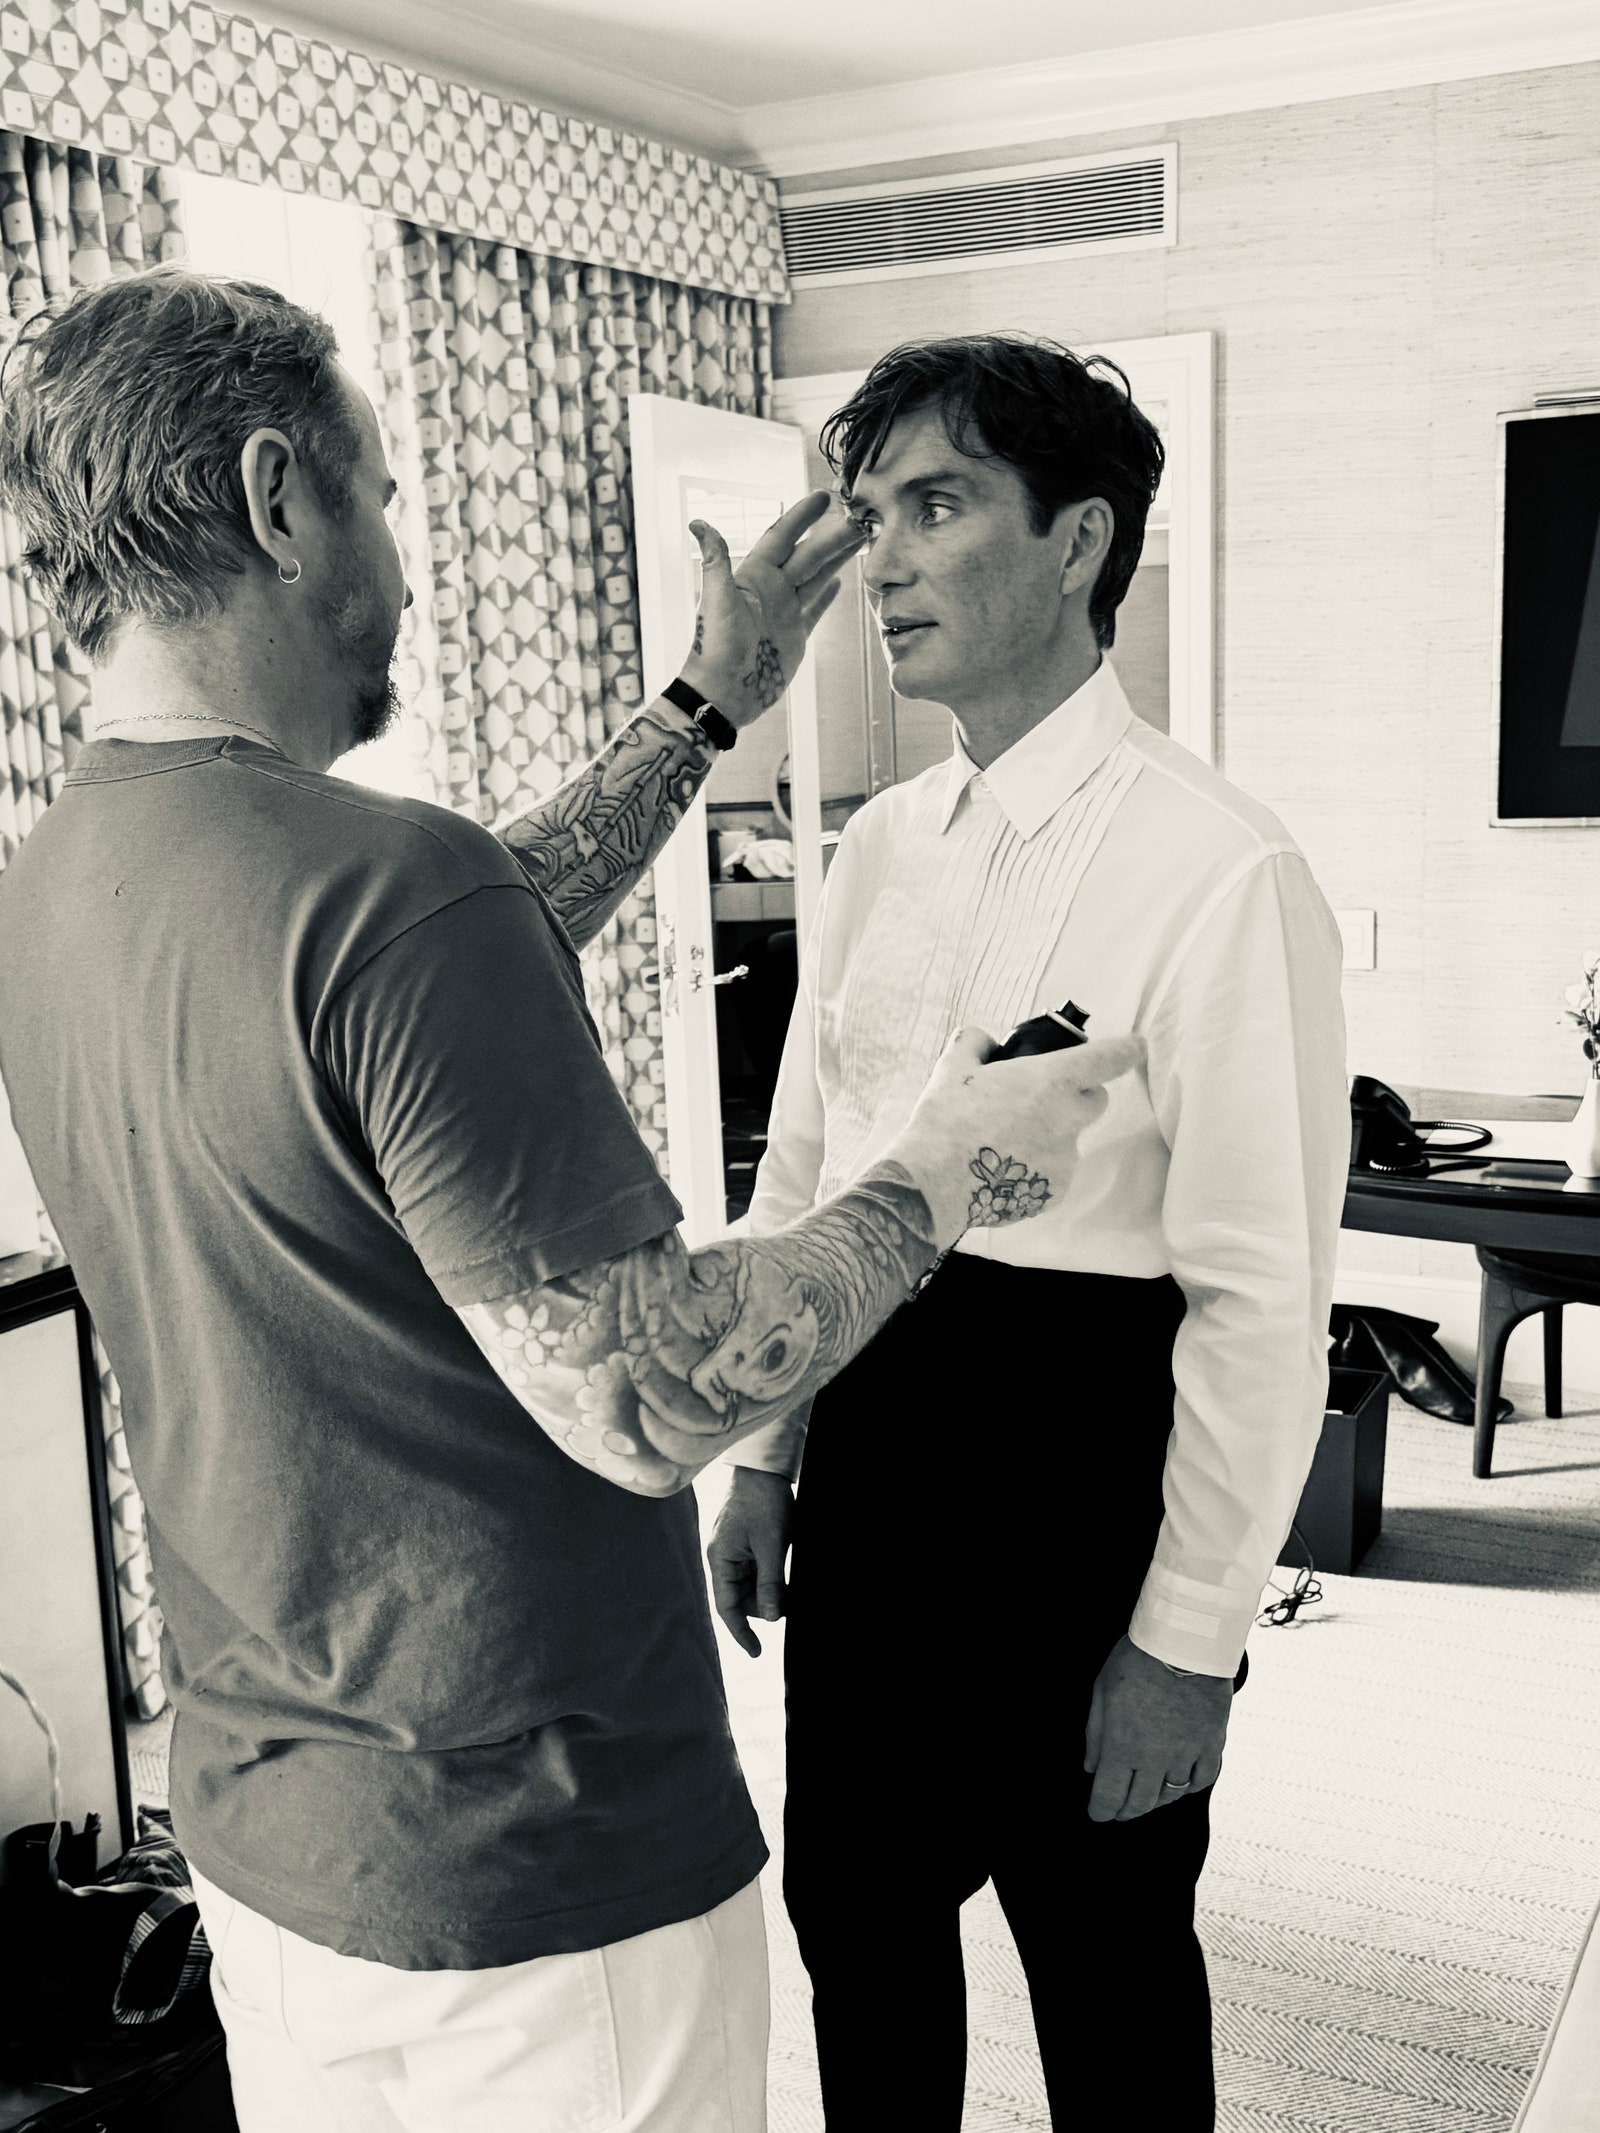 Cillian Murphy's PreOscars Grooming Routine Included a Lymphatic Drainage Massage